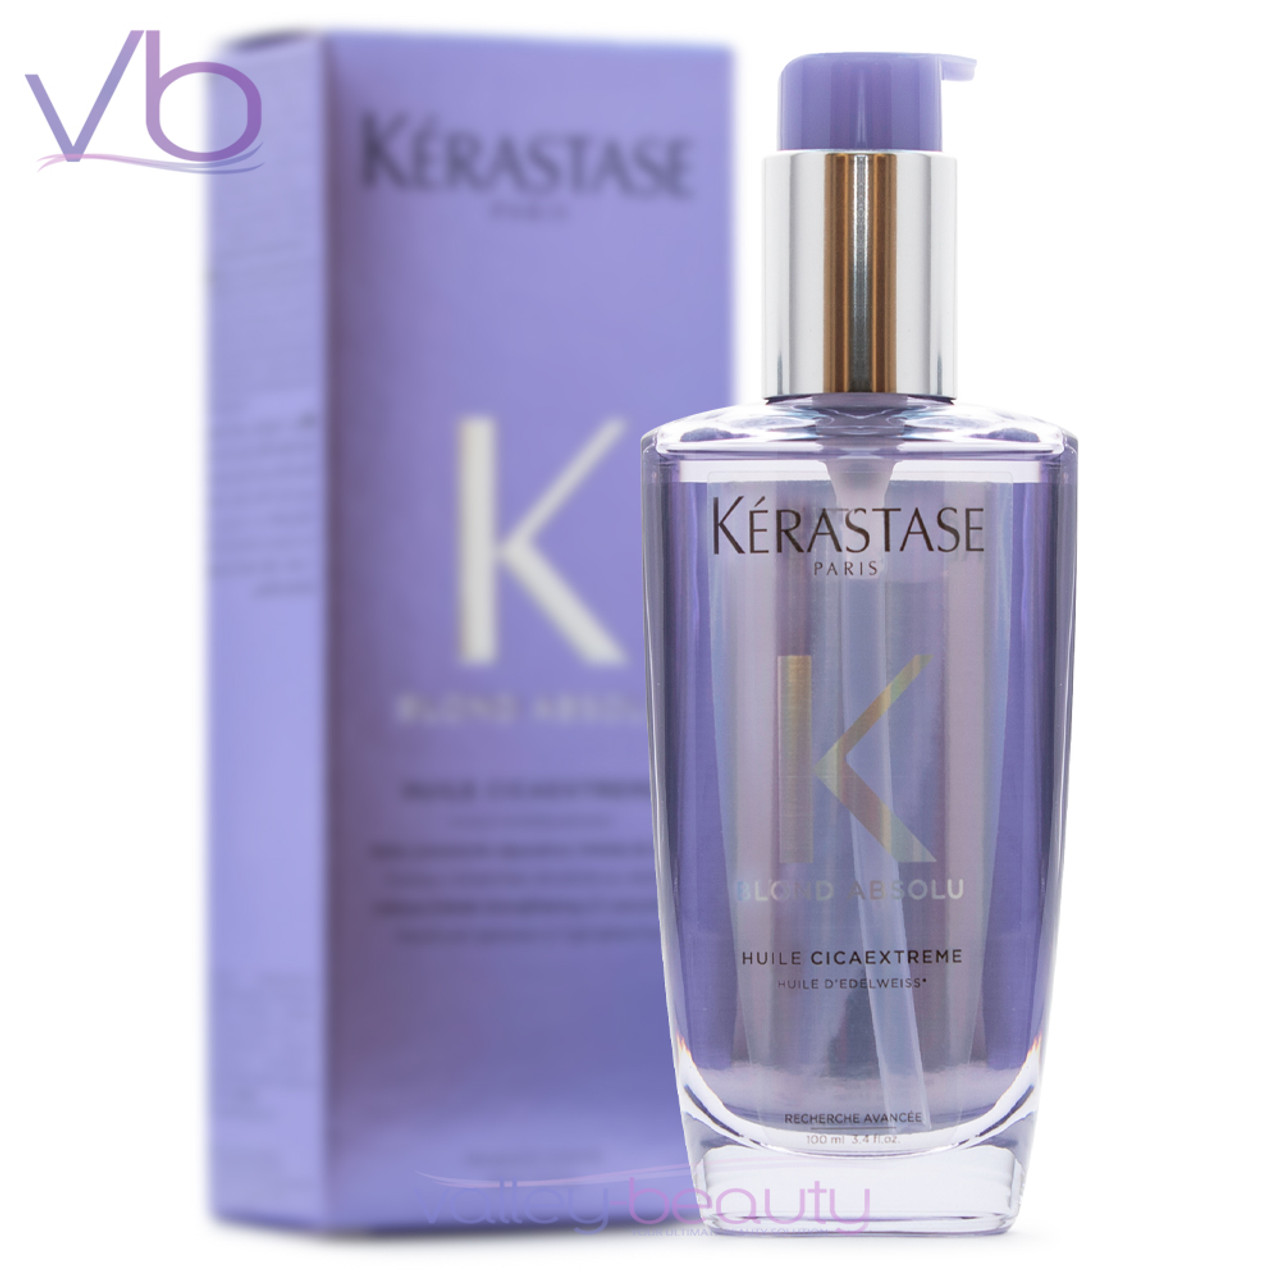 Kerastase Blond Absolu Huile Cicaextreme | Leave-in Oil for Bleached Hair